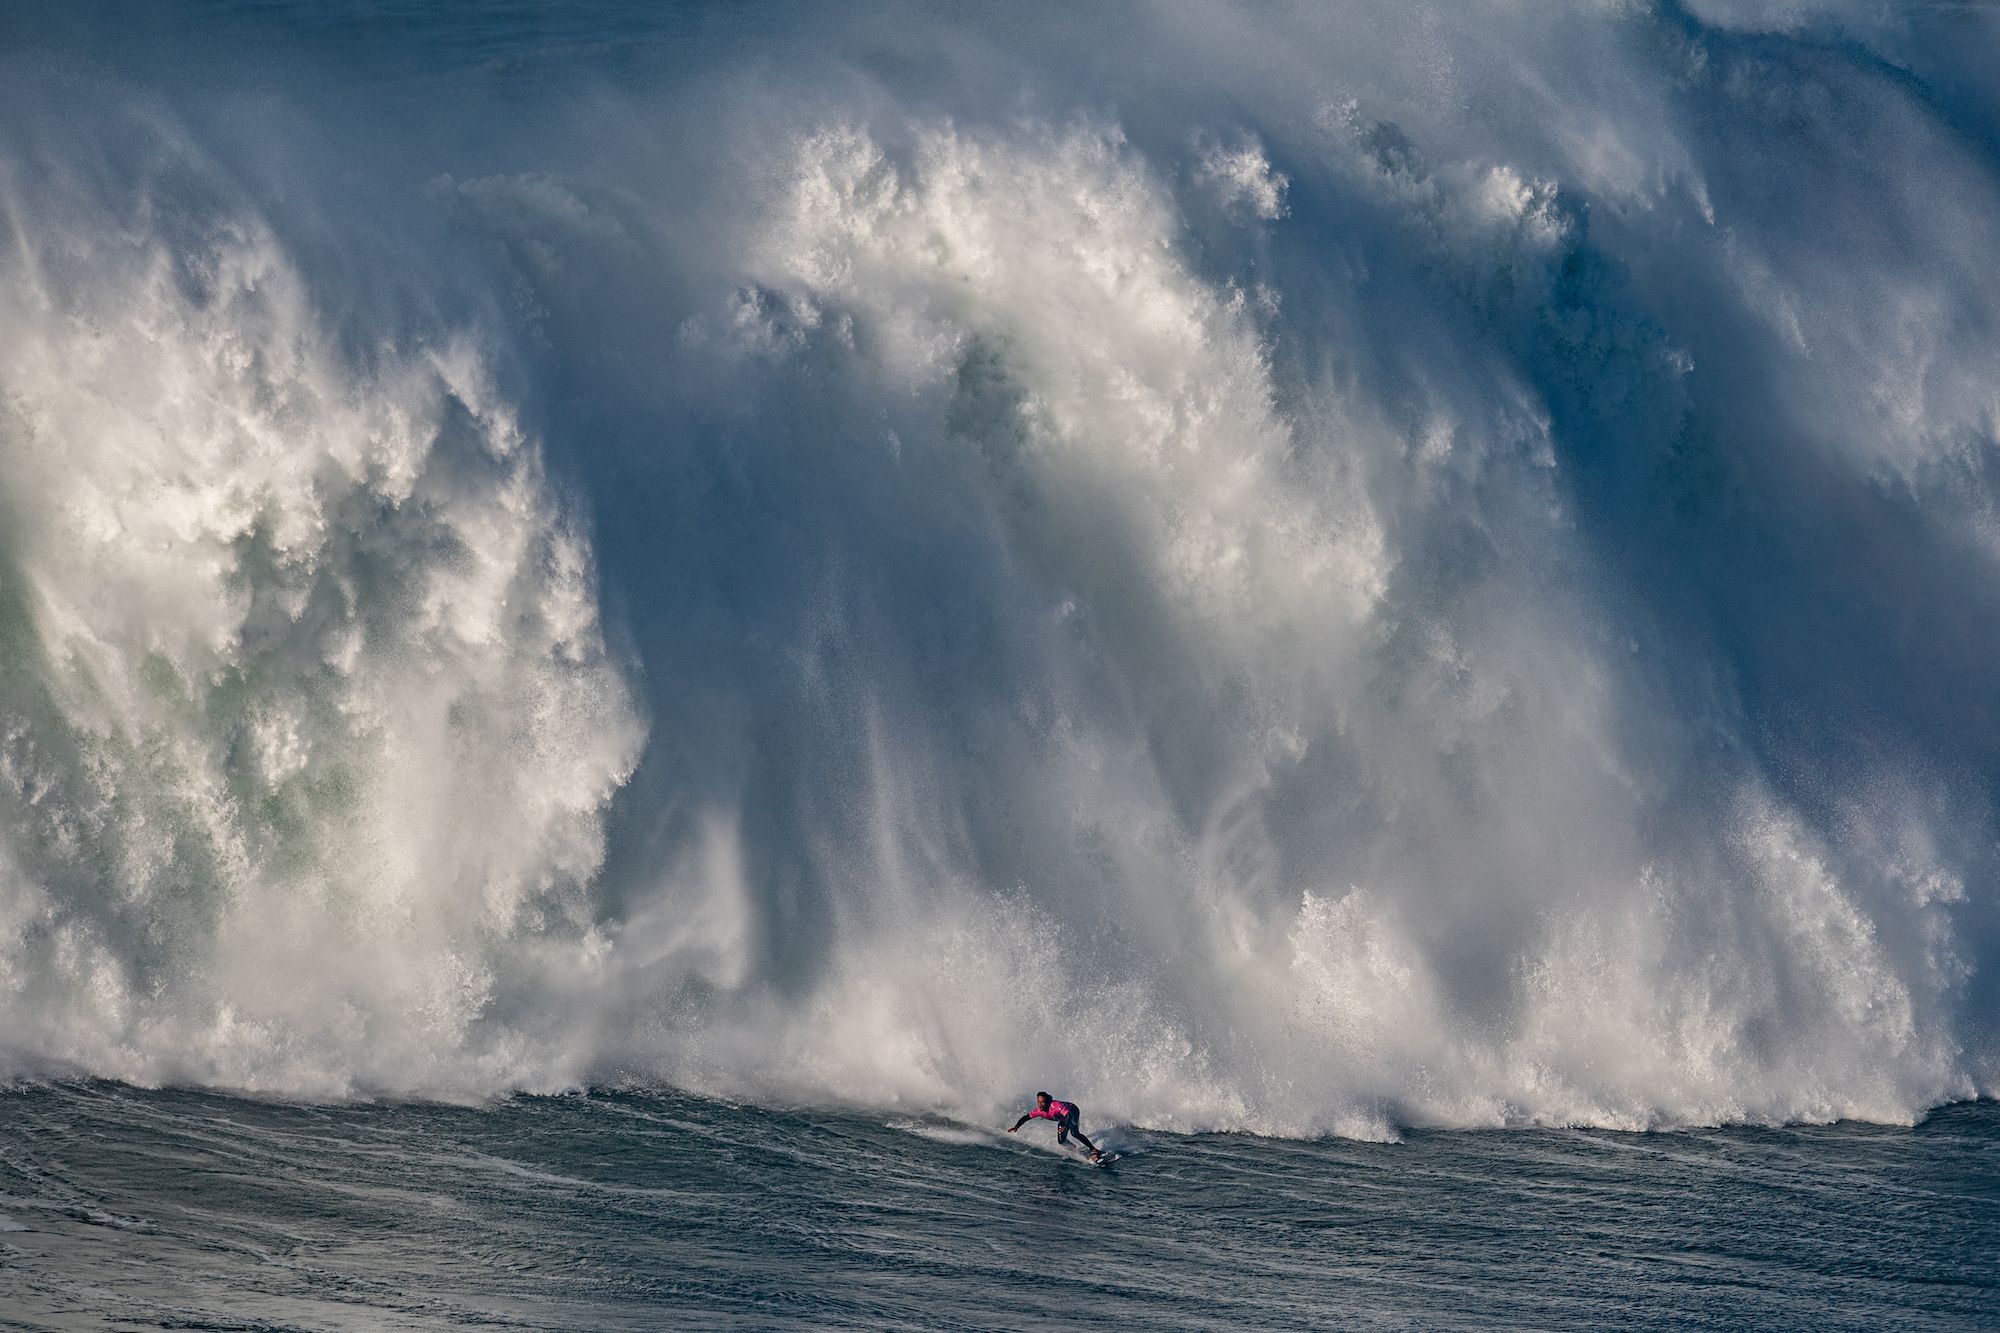 A New Year's Day Giant Swell at Nazare - Surfer